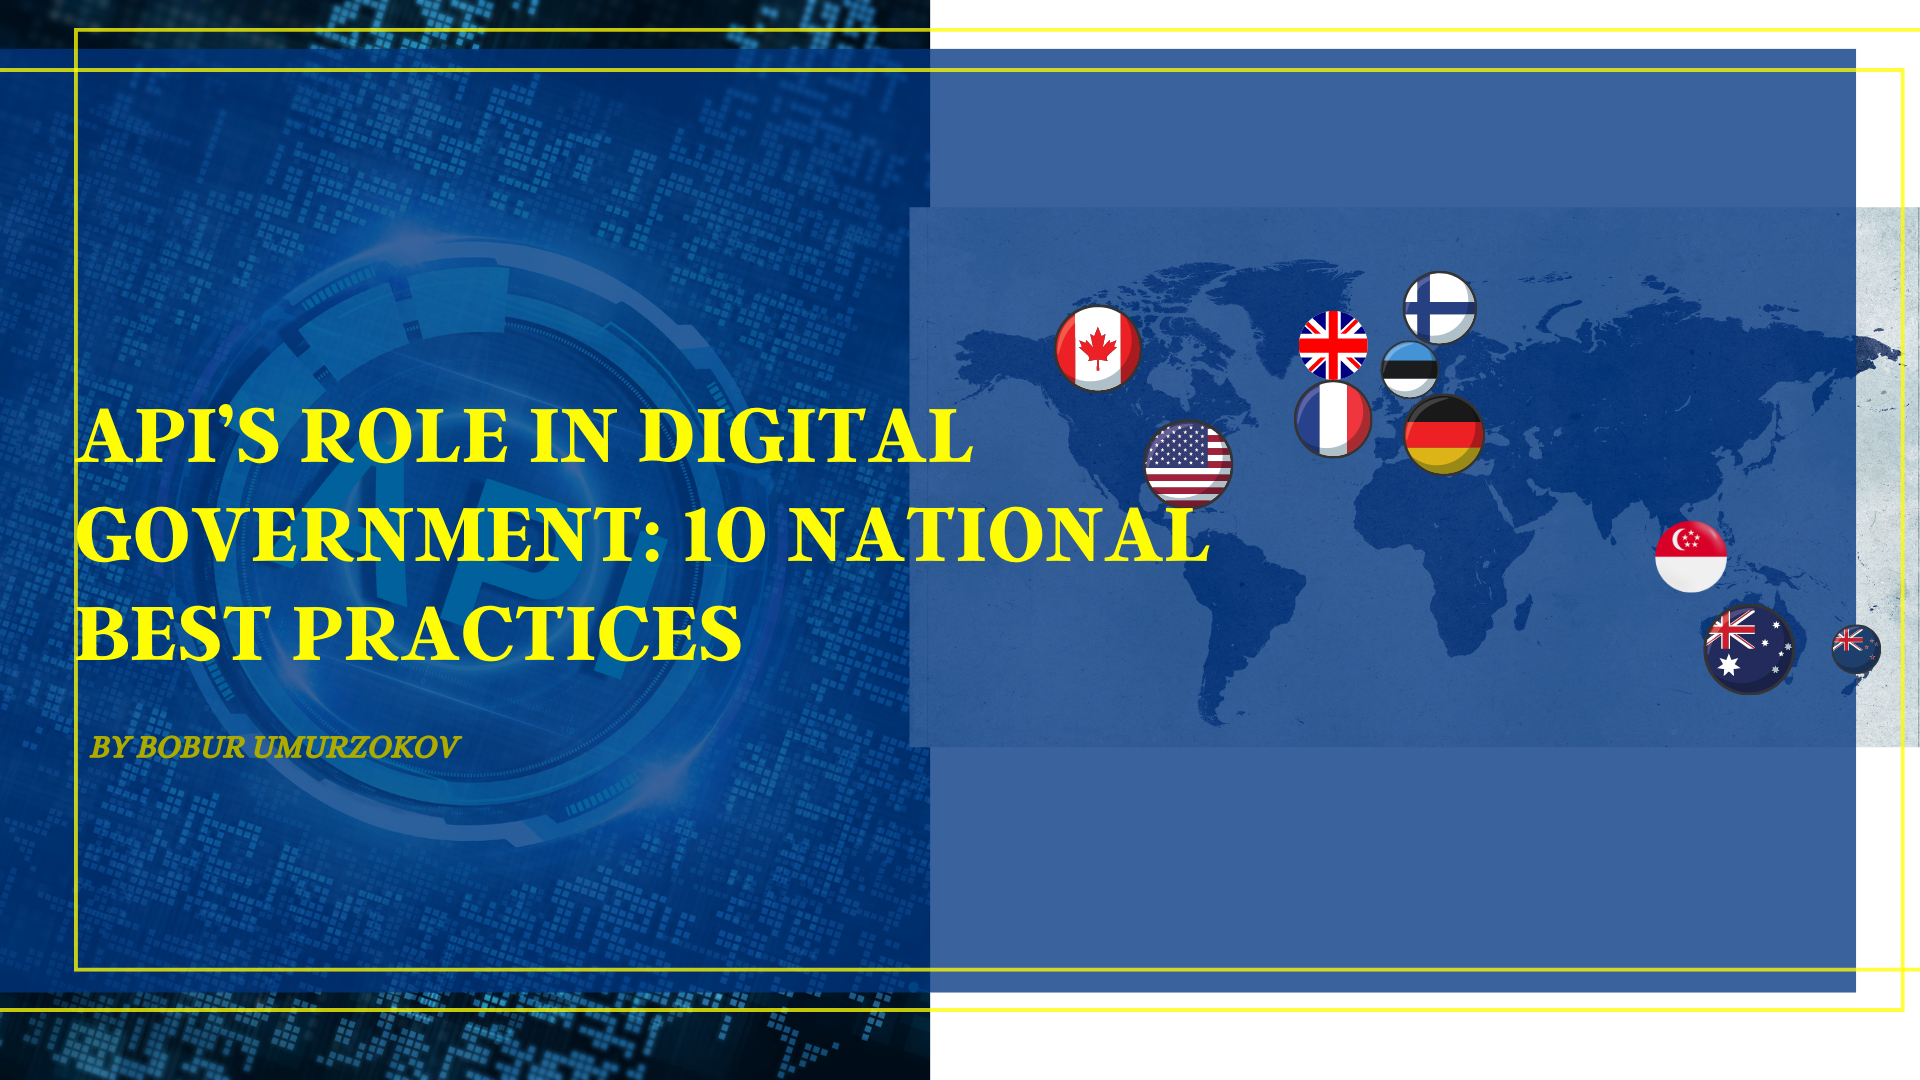 API’s role in digital government, 10 national best practices